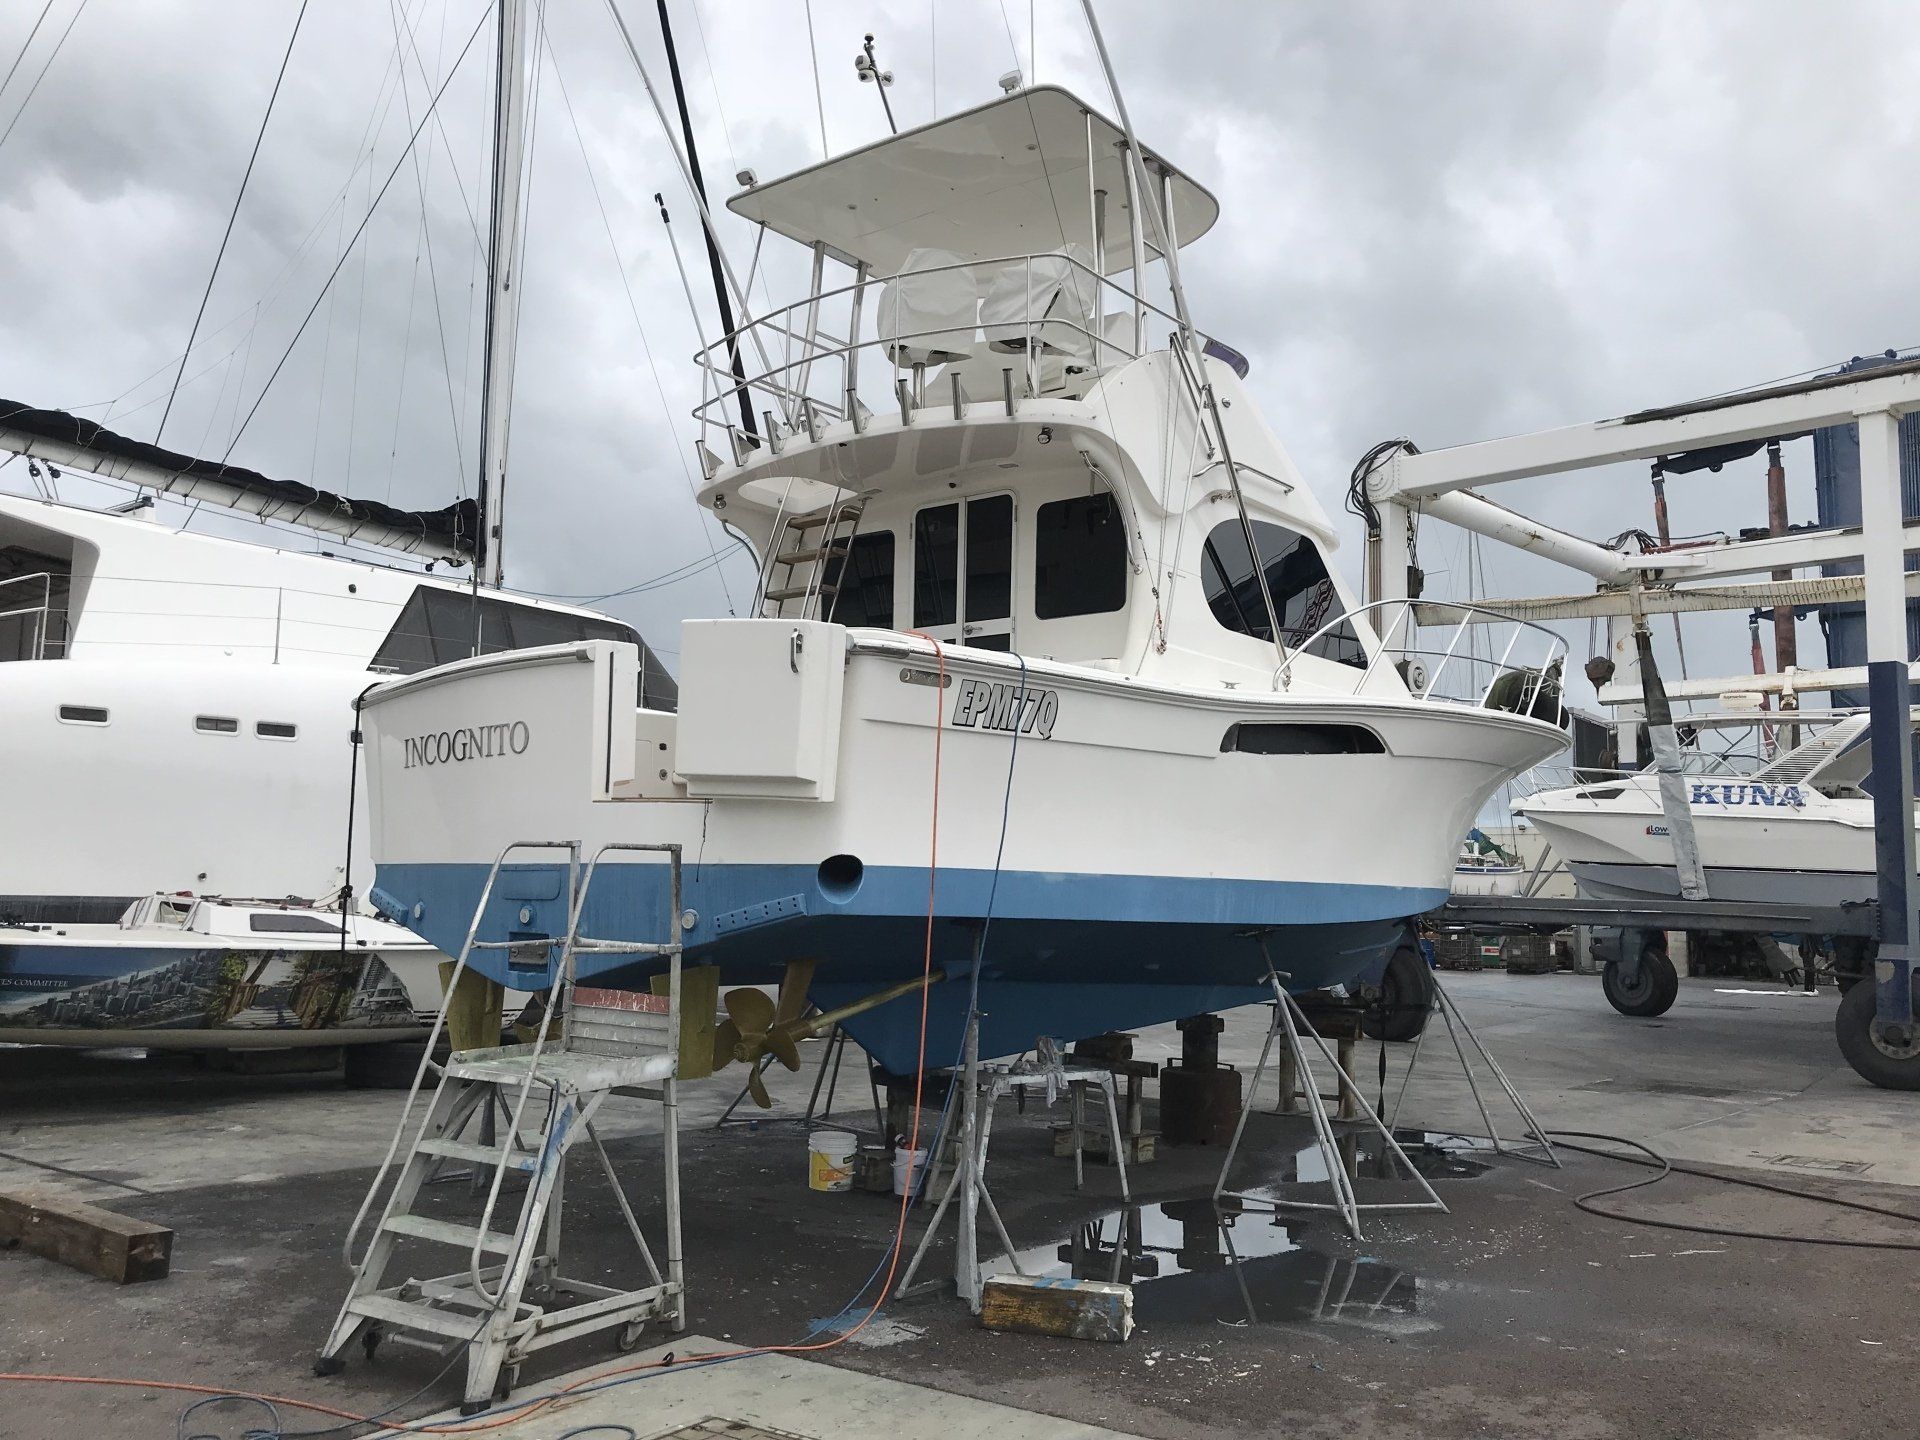 Repairing And Painting Yacht - Boat Transportation in South Townsville, QLD